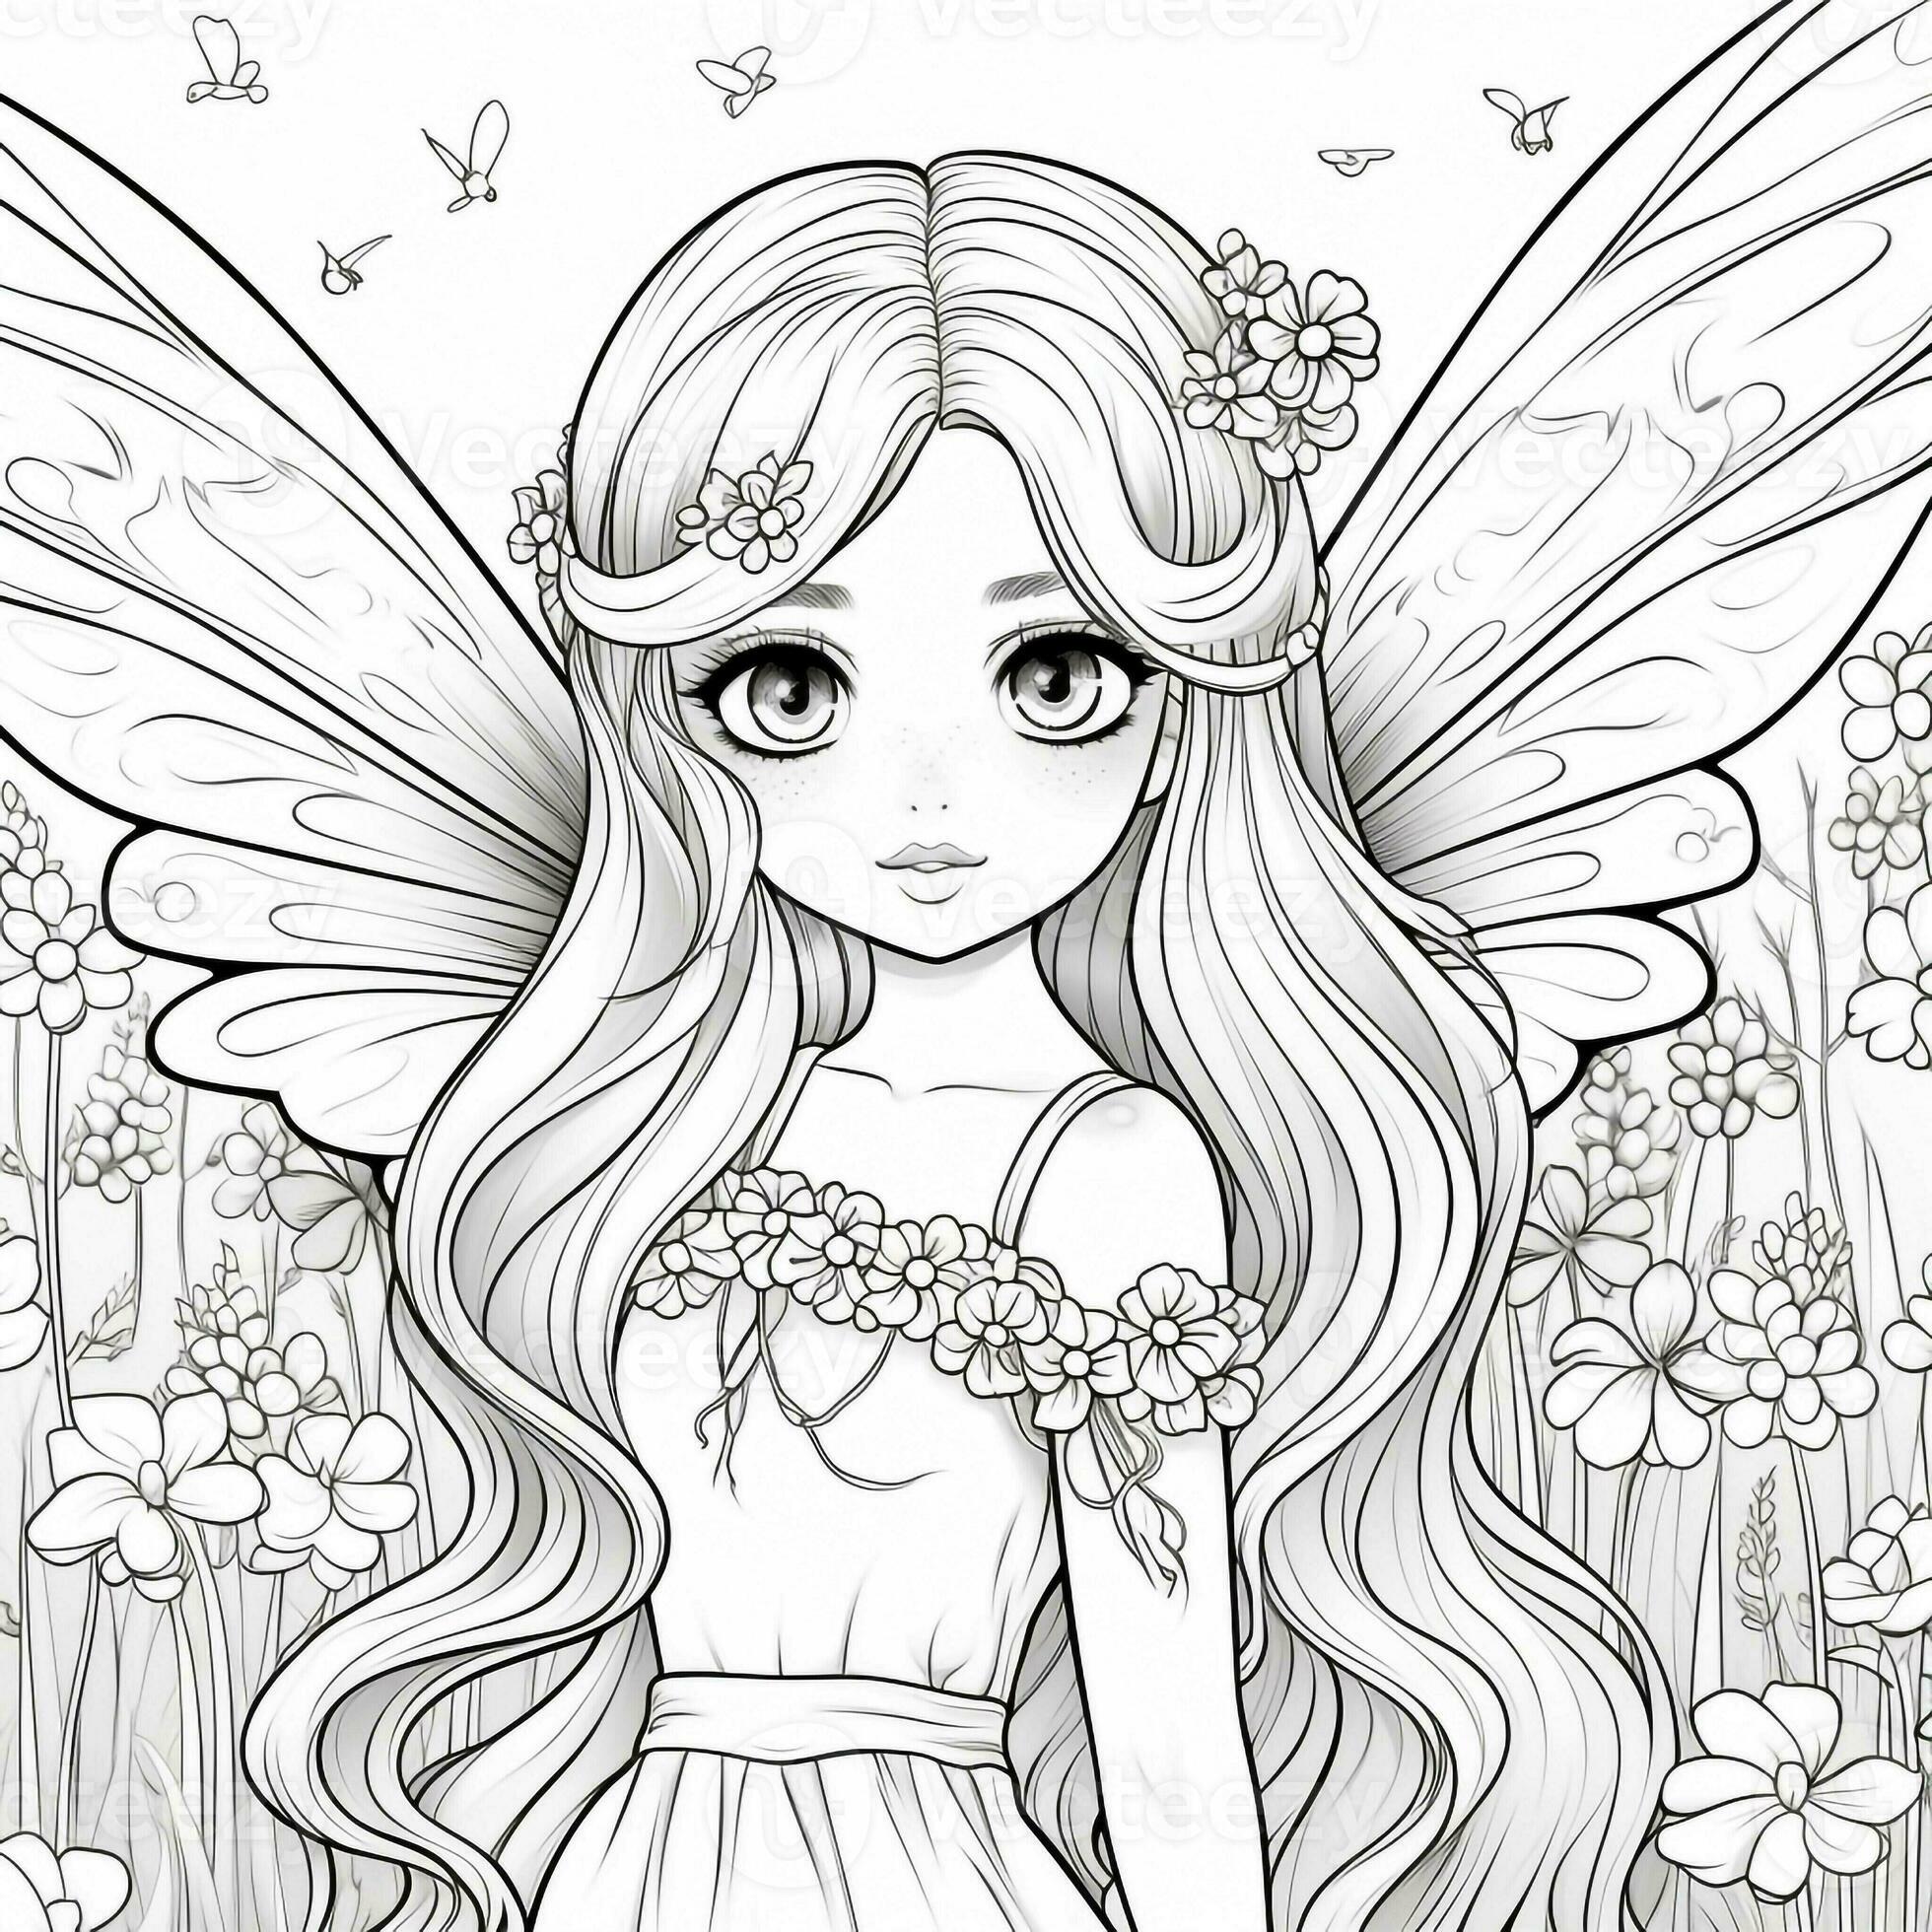 https://static.vecteezy.com/system/resources/previews/026/627/977/large_2x/fairy-girl-coloring-pages-photo.jpg